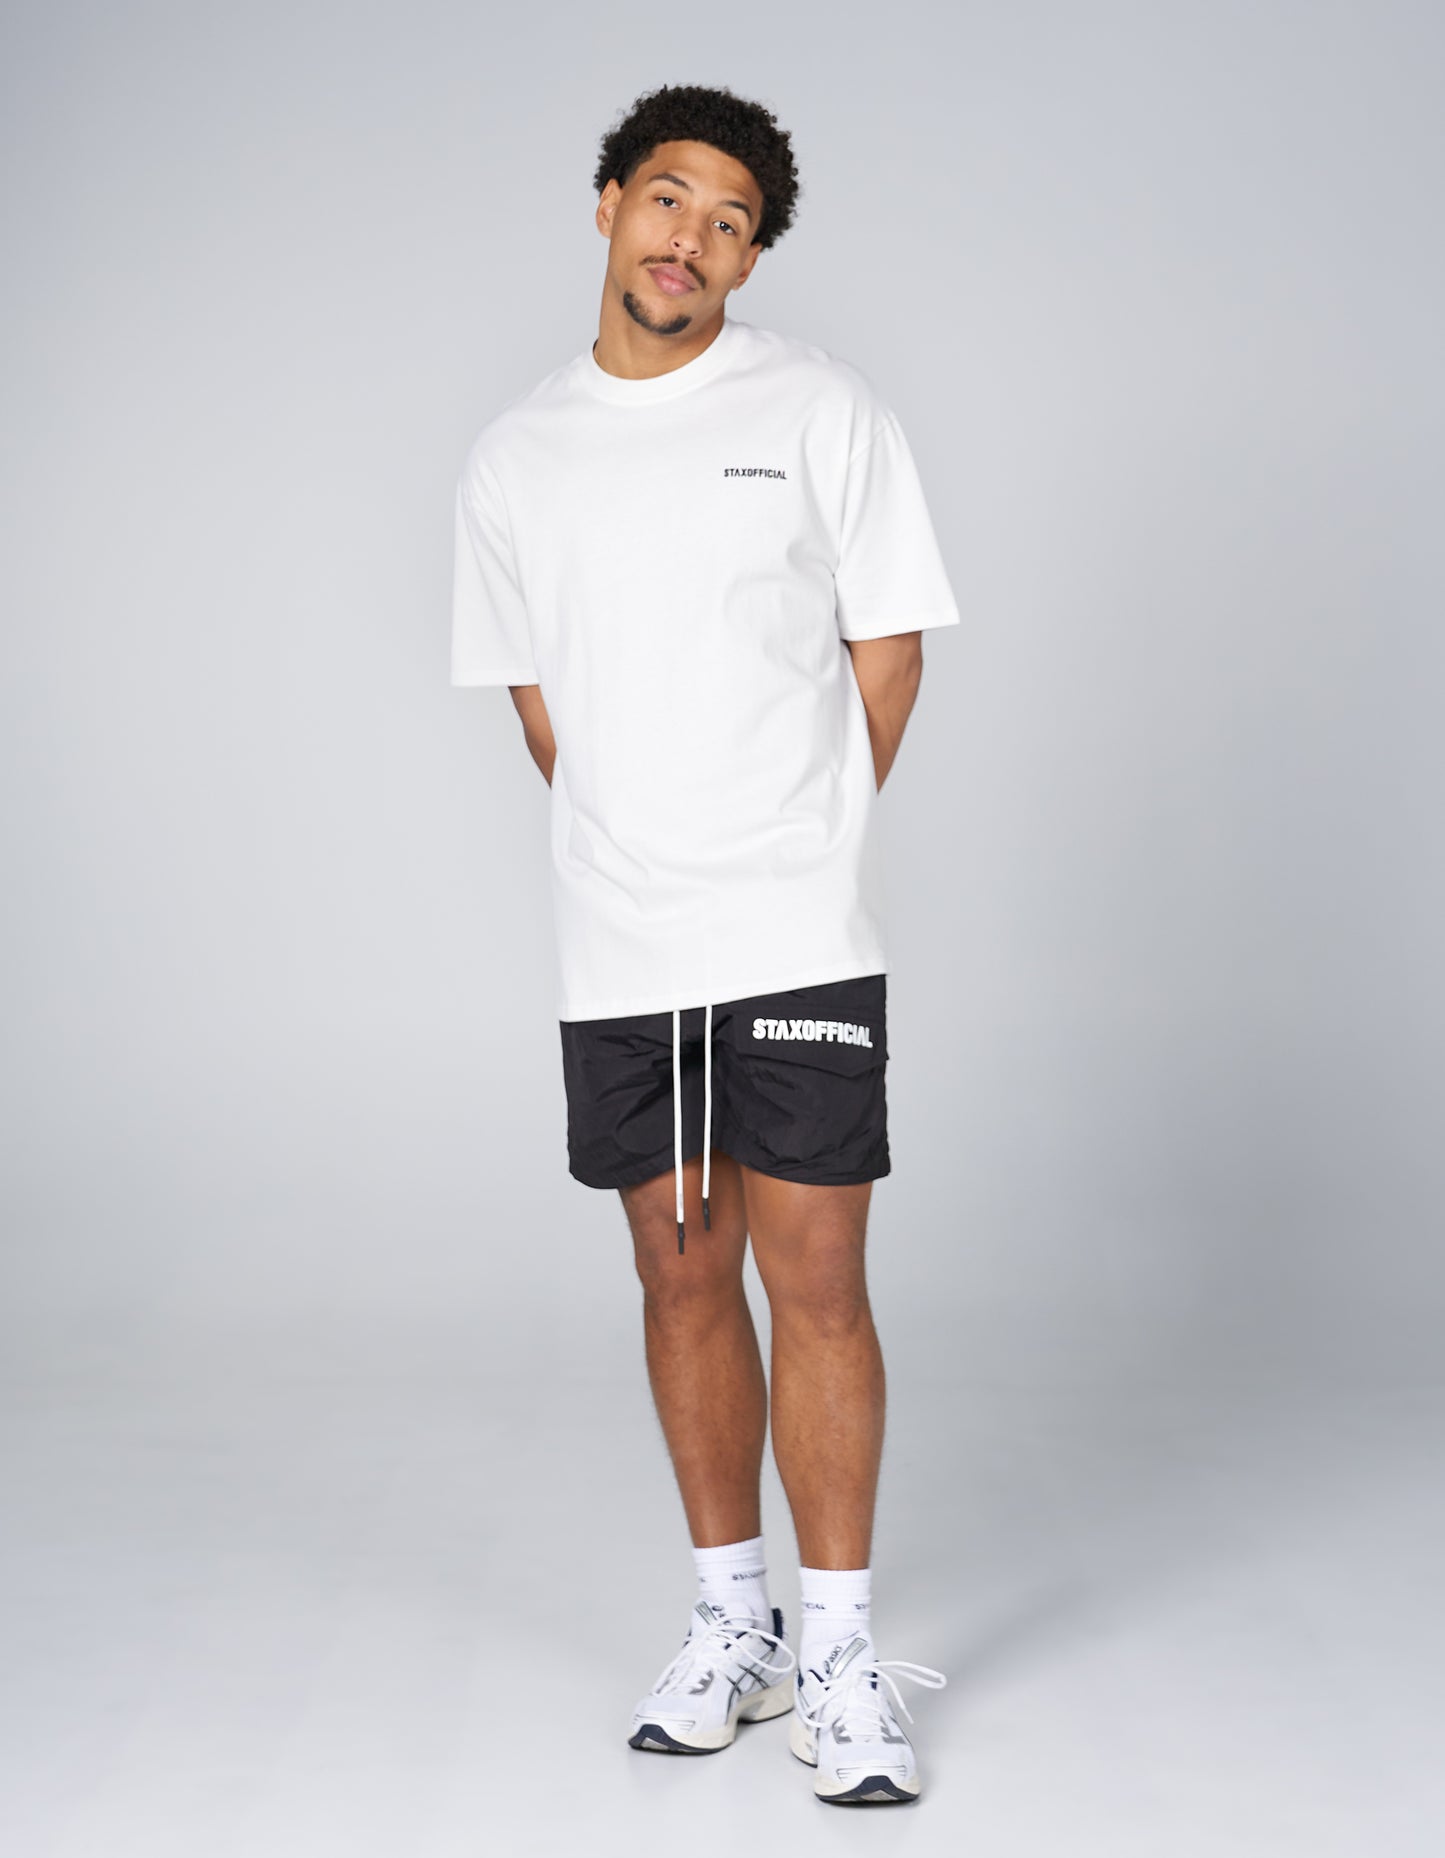 STAXOFFICIAL Unisex Tee - White